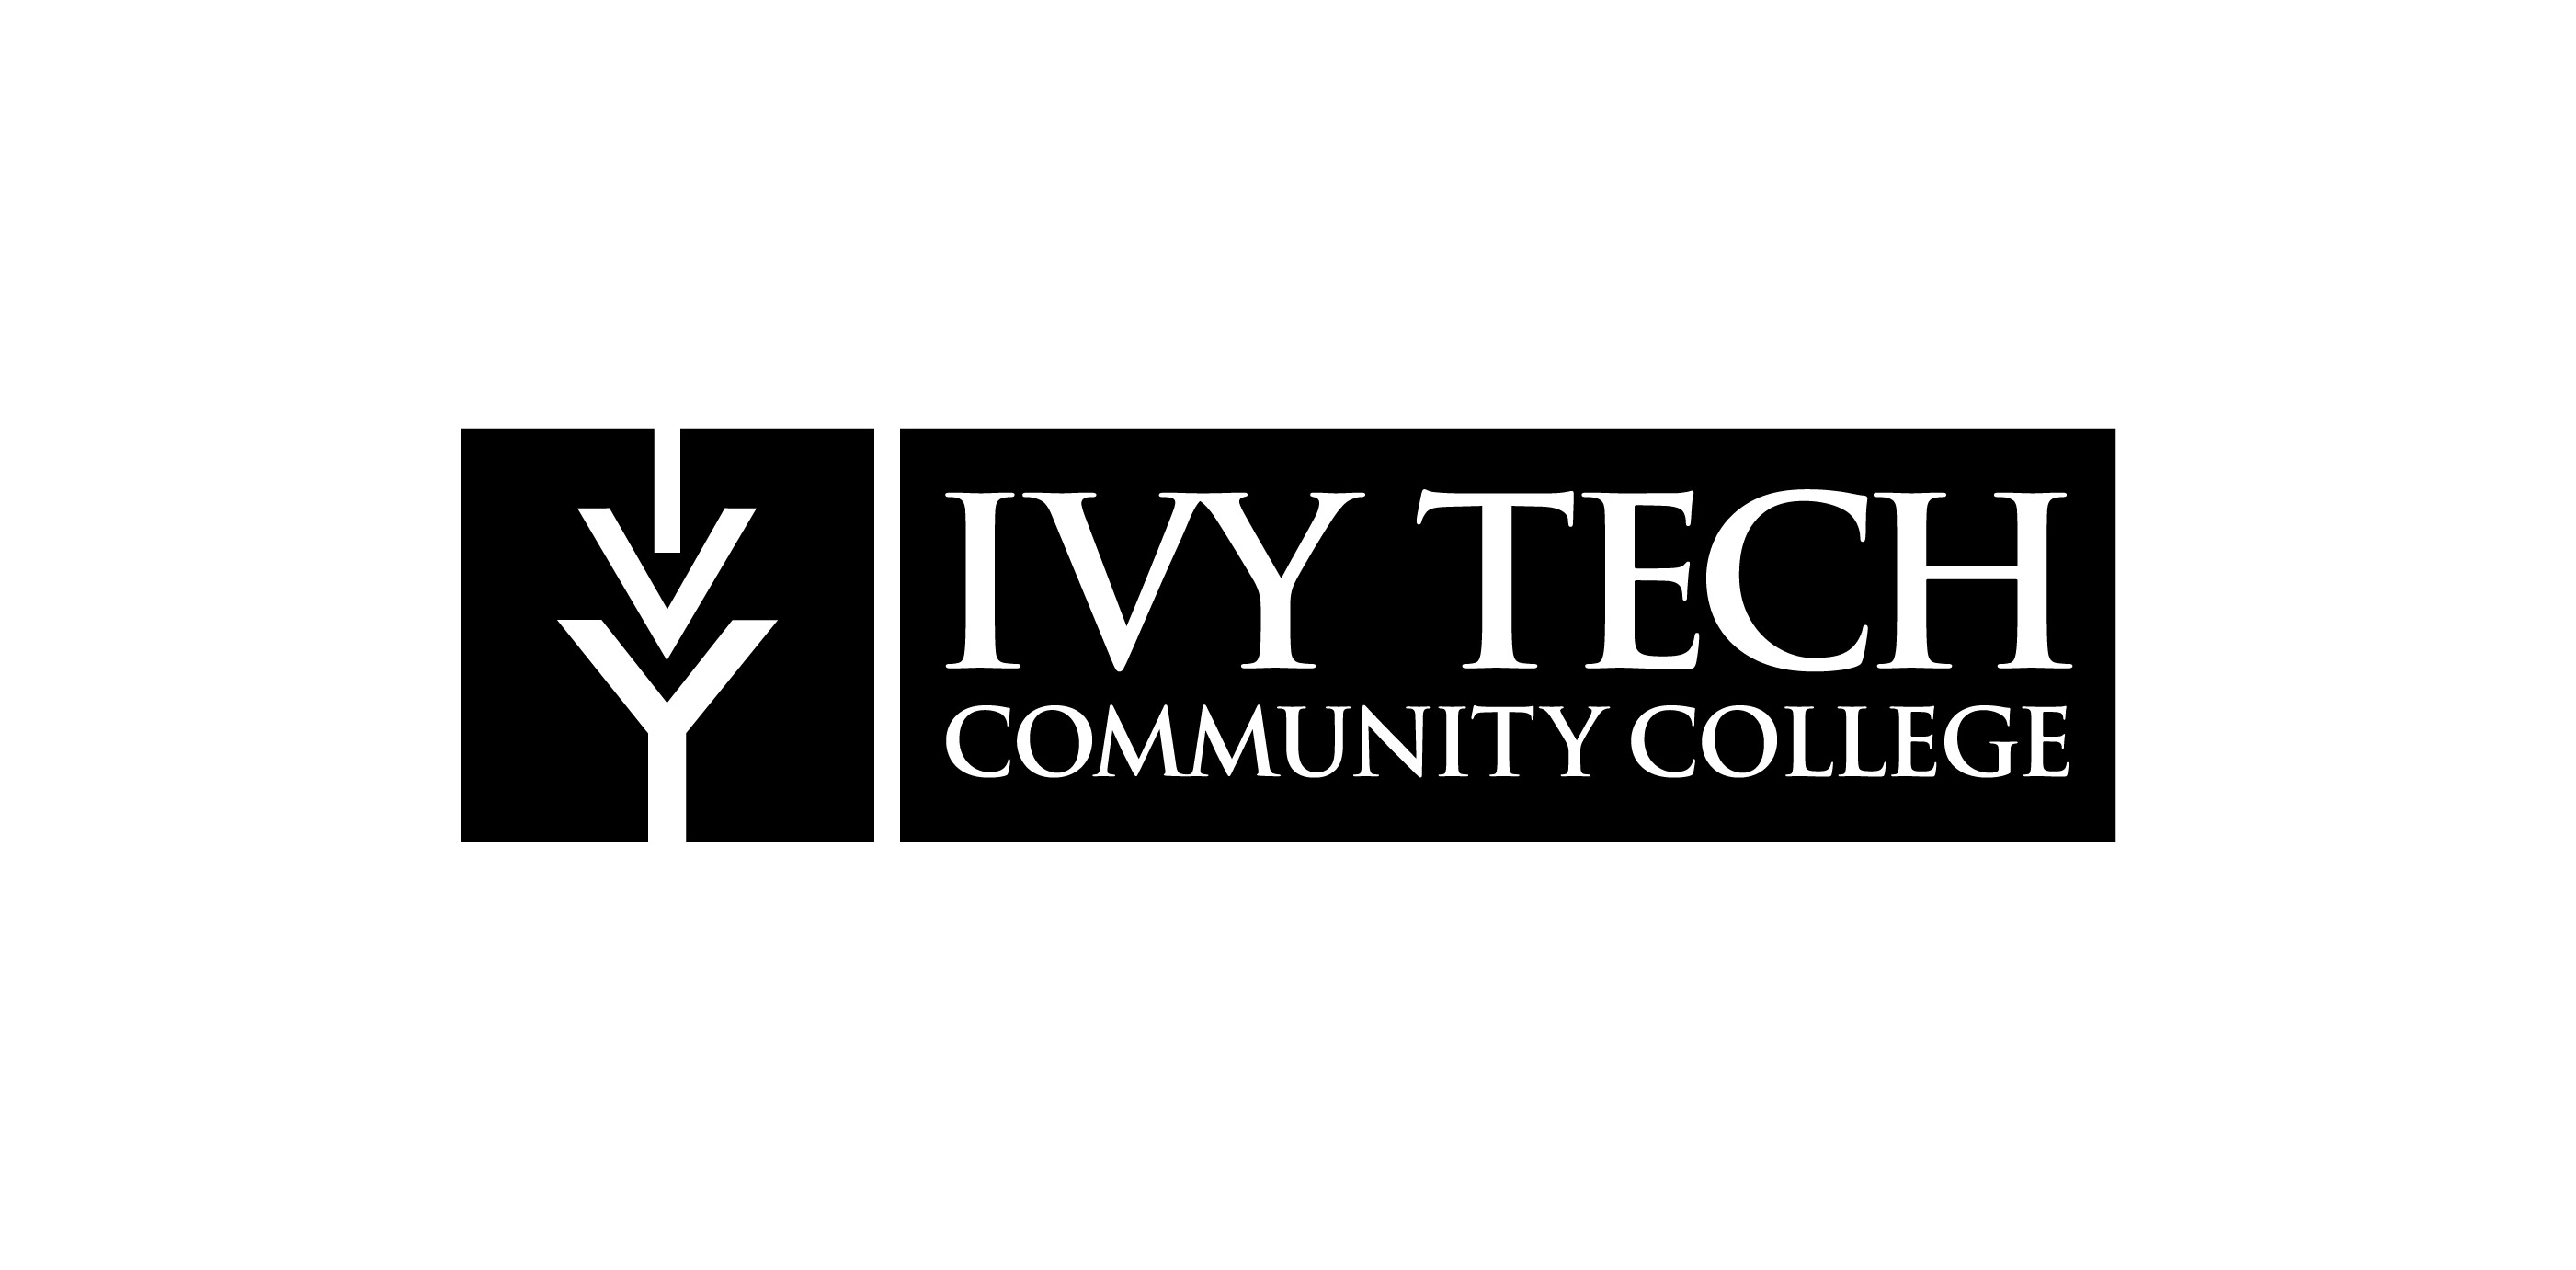 downloading microsoft word for free for students ivy tech